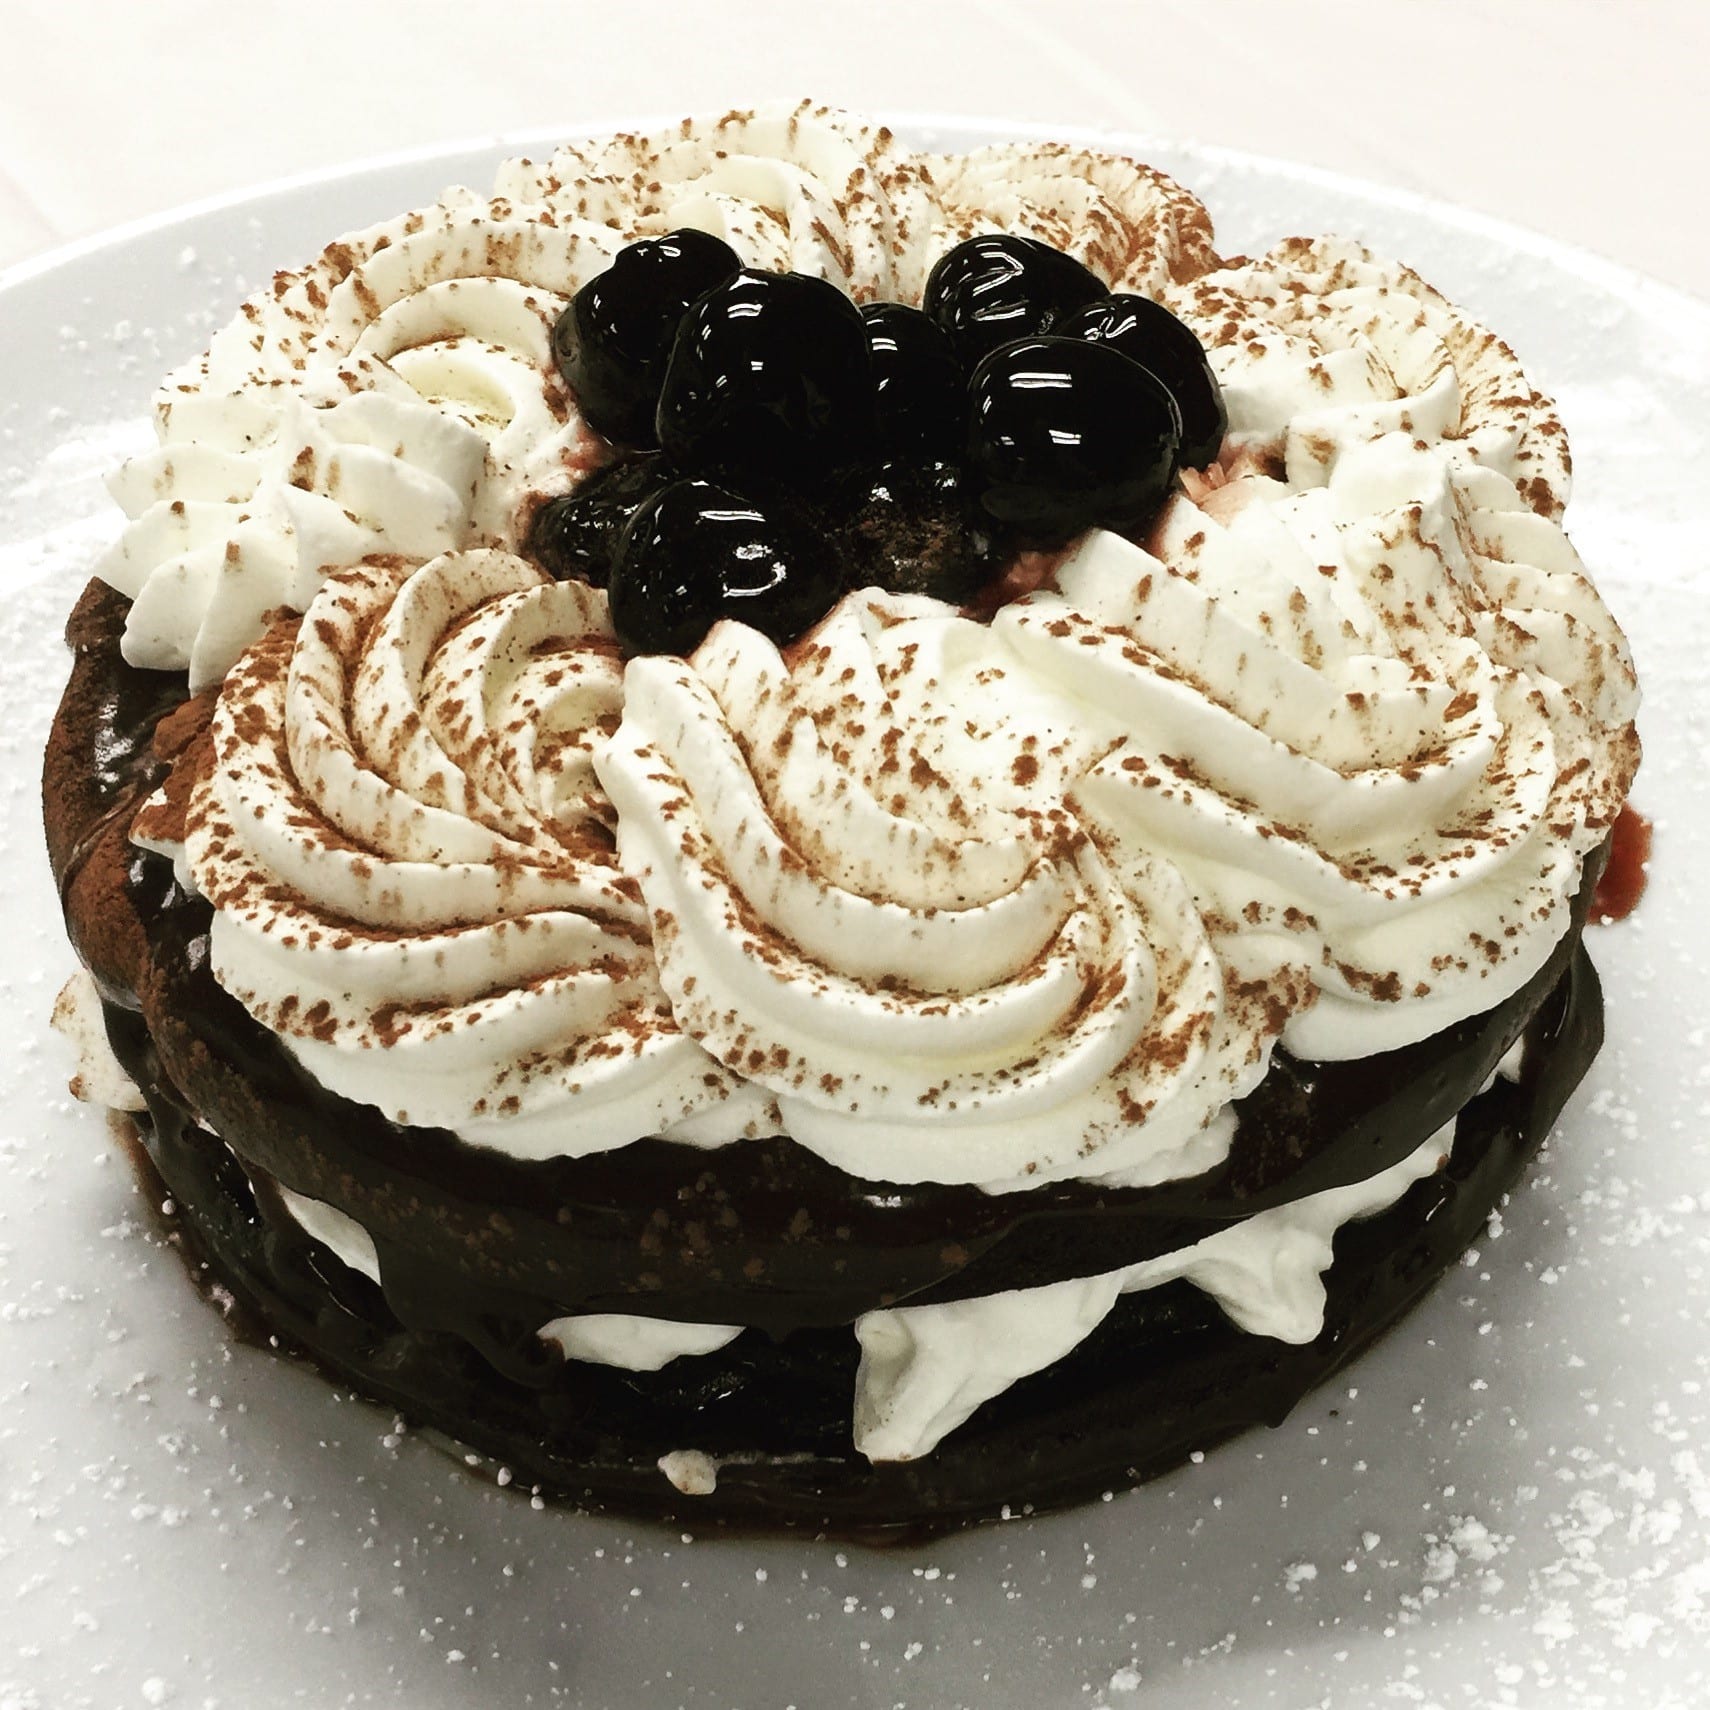 DID YOU KNOW…Today is National Black Forest Cake Day?